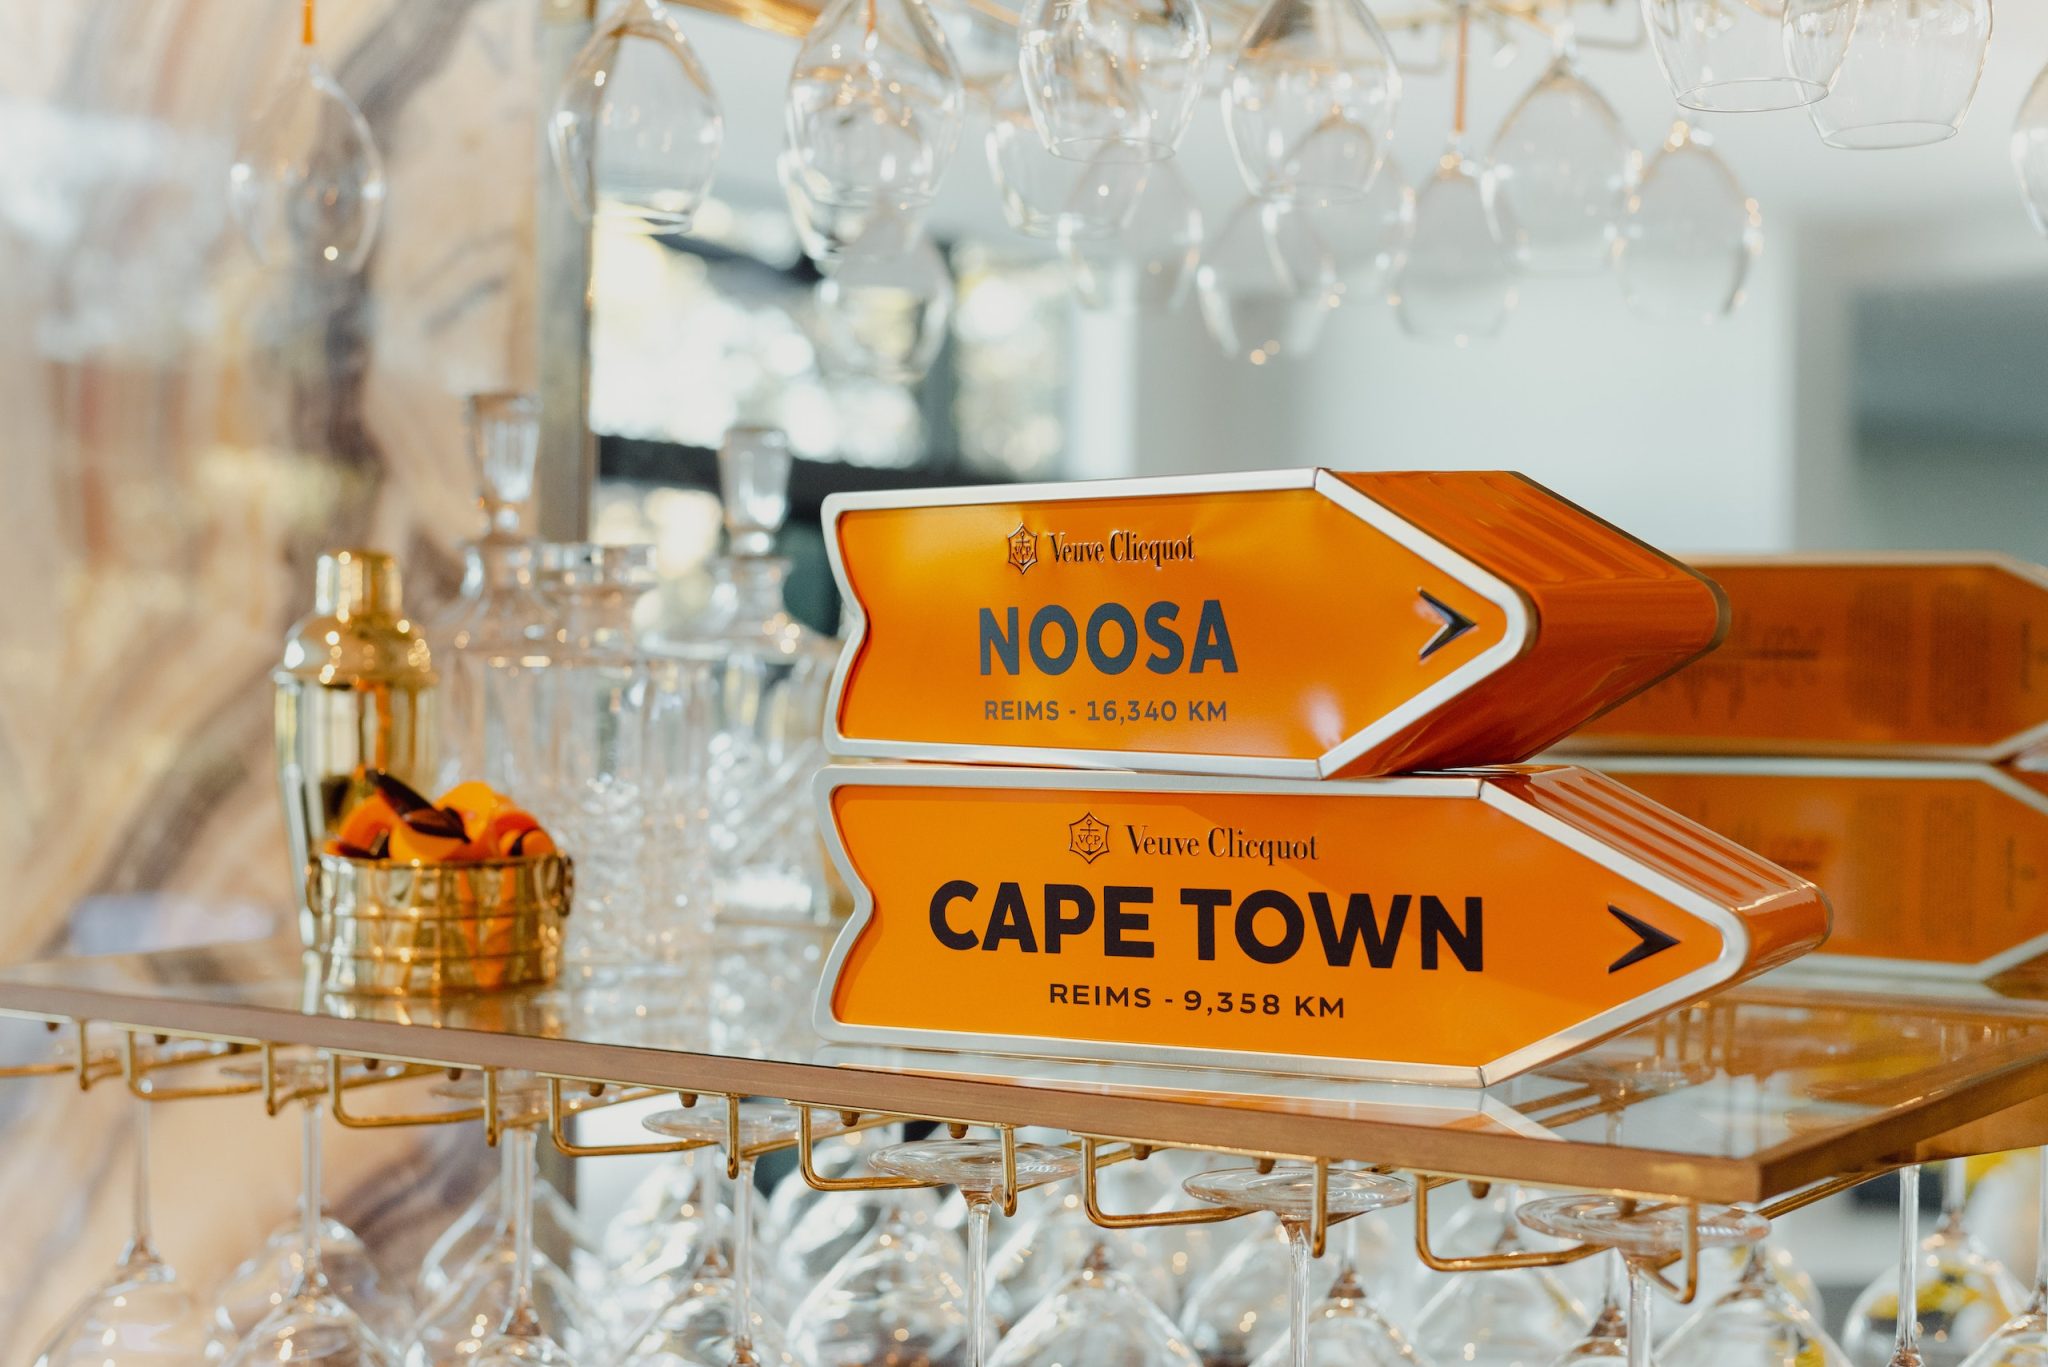 A Perfect Blend of Elegance: Hotel Clicquot, a Partnership with Domic Noosa and Veuve Clicquot